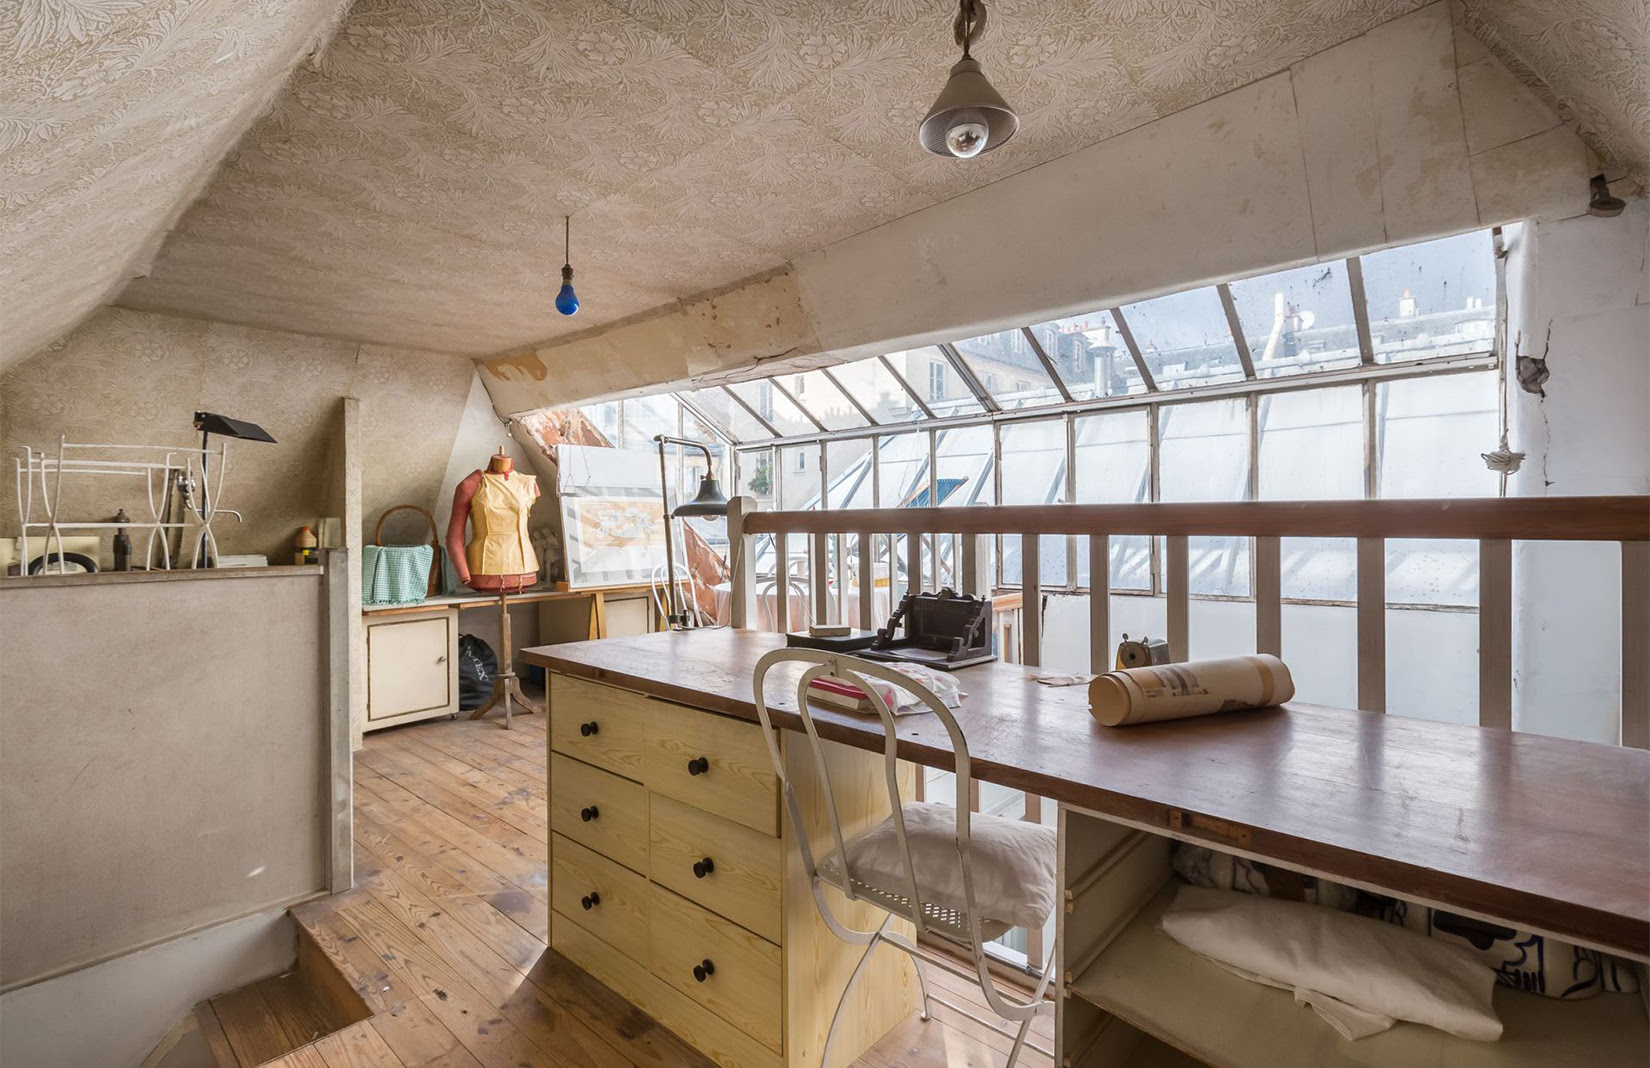 Amazing studio space for visual artists !!!!! 5 Paris Apartments For Sale With Art Connections